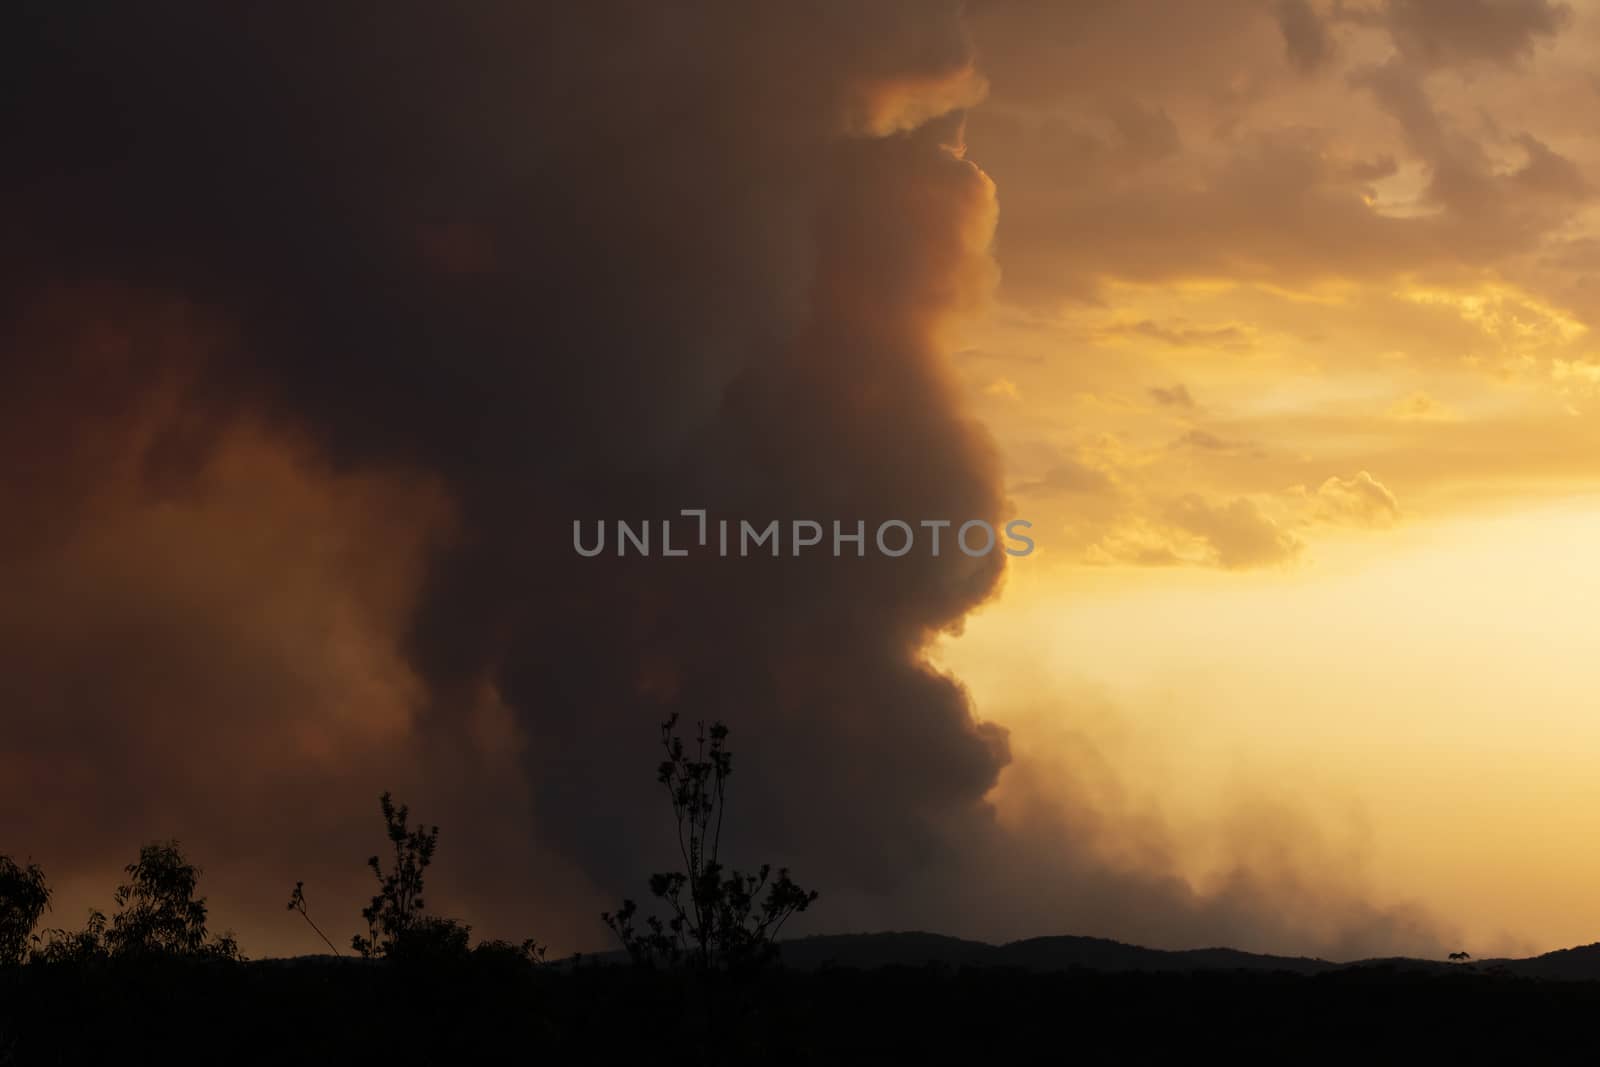 Bush fire smoke in a valley in The Blue Mountains in Australia by WittkePhotos